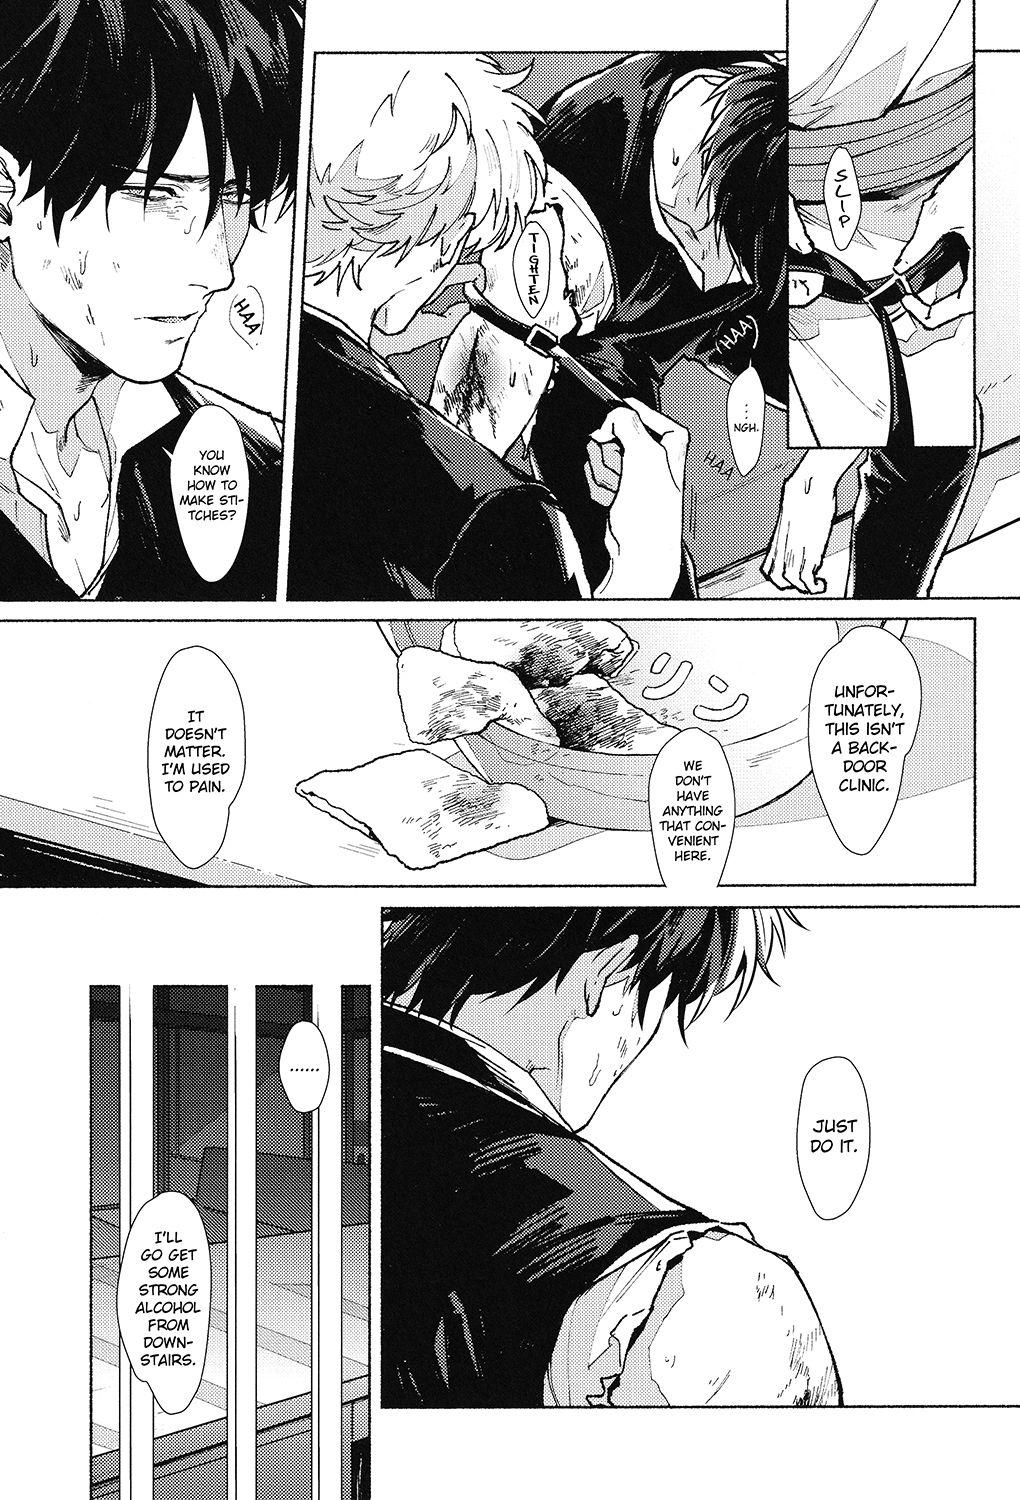 Riding VOID - Gintama Mmf - Page 7